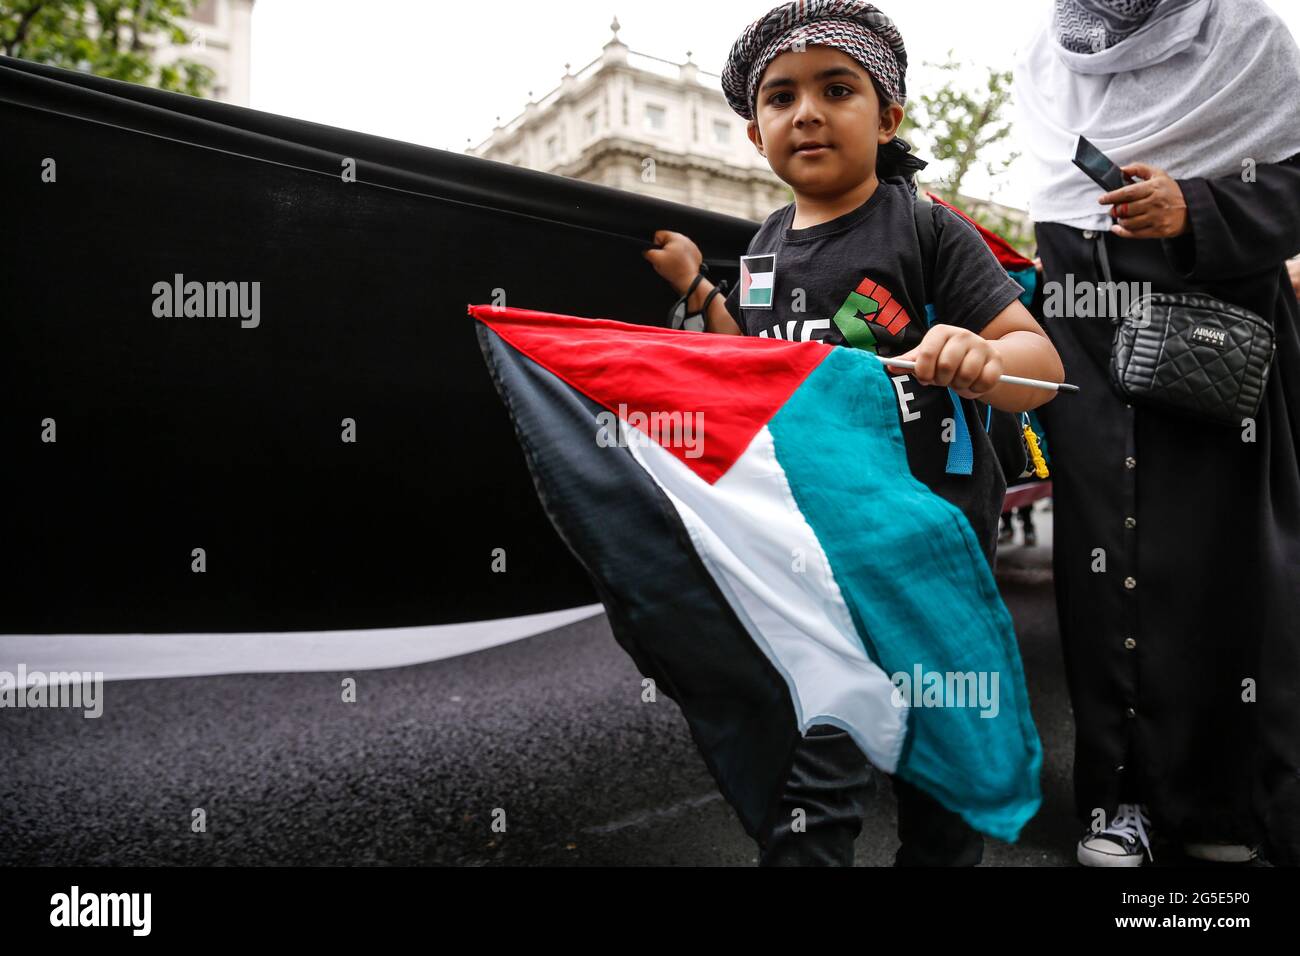 London,  UK on June 26, 2021: Pro Palestinian artivists join anti-government protest at Whitehall Street. The protest unites activists from many opposition left wing movements such as Kill the Bill, The People's Assembly, NHS Staff Voices, Stop the War Coalition or Extintion Rebellion. Stock Photo